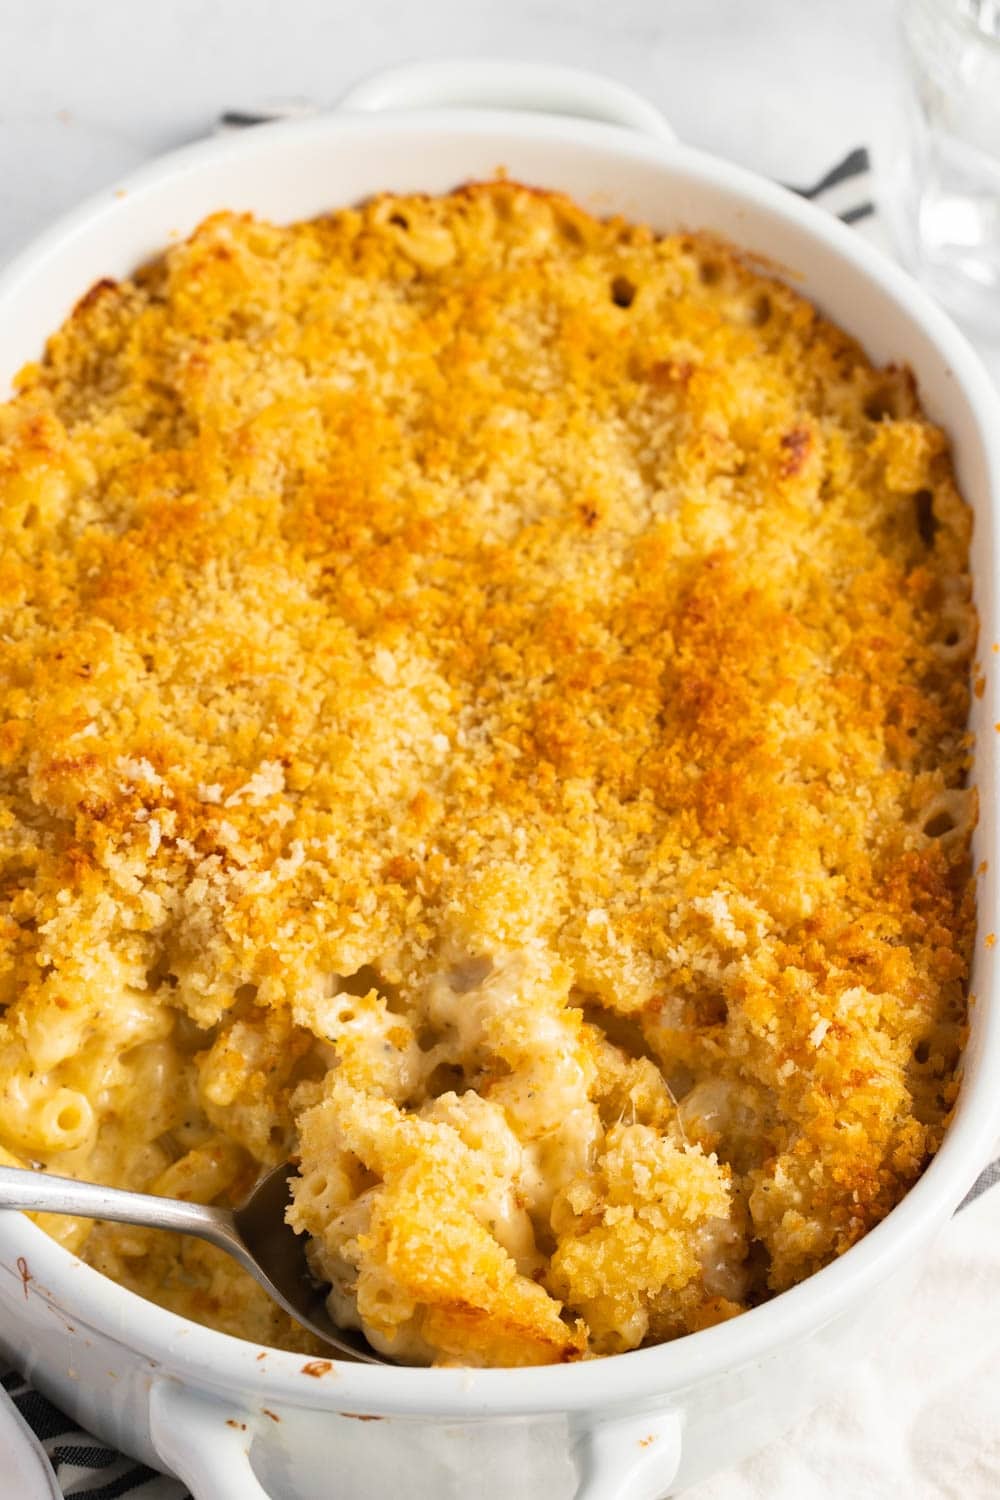 Mac and cheese in a casserole dish.